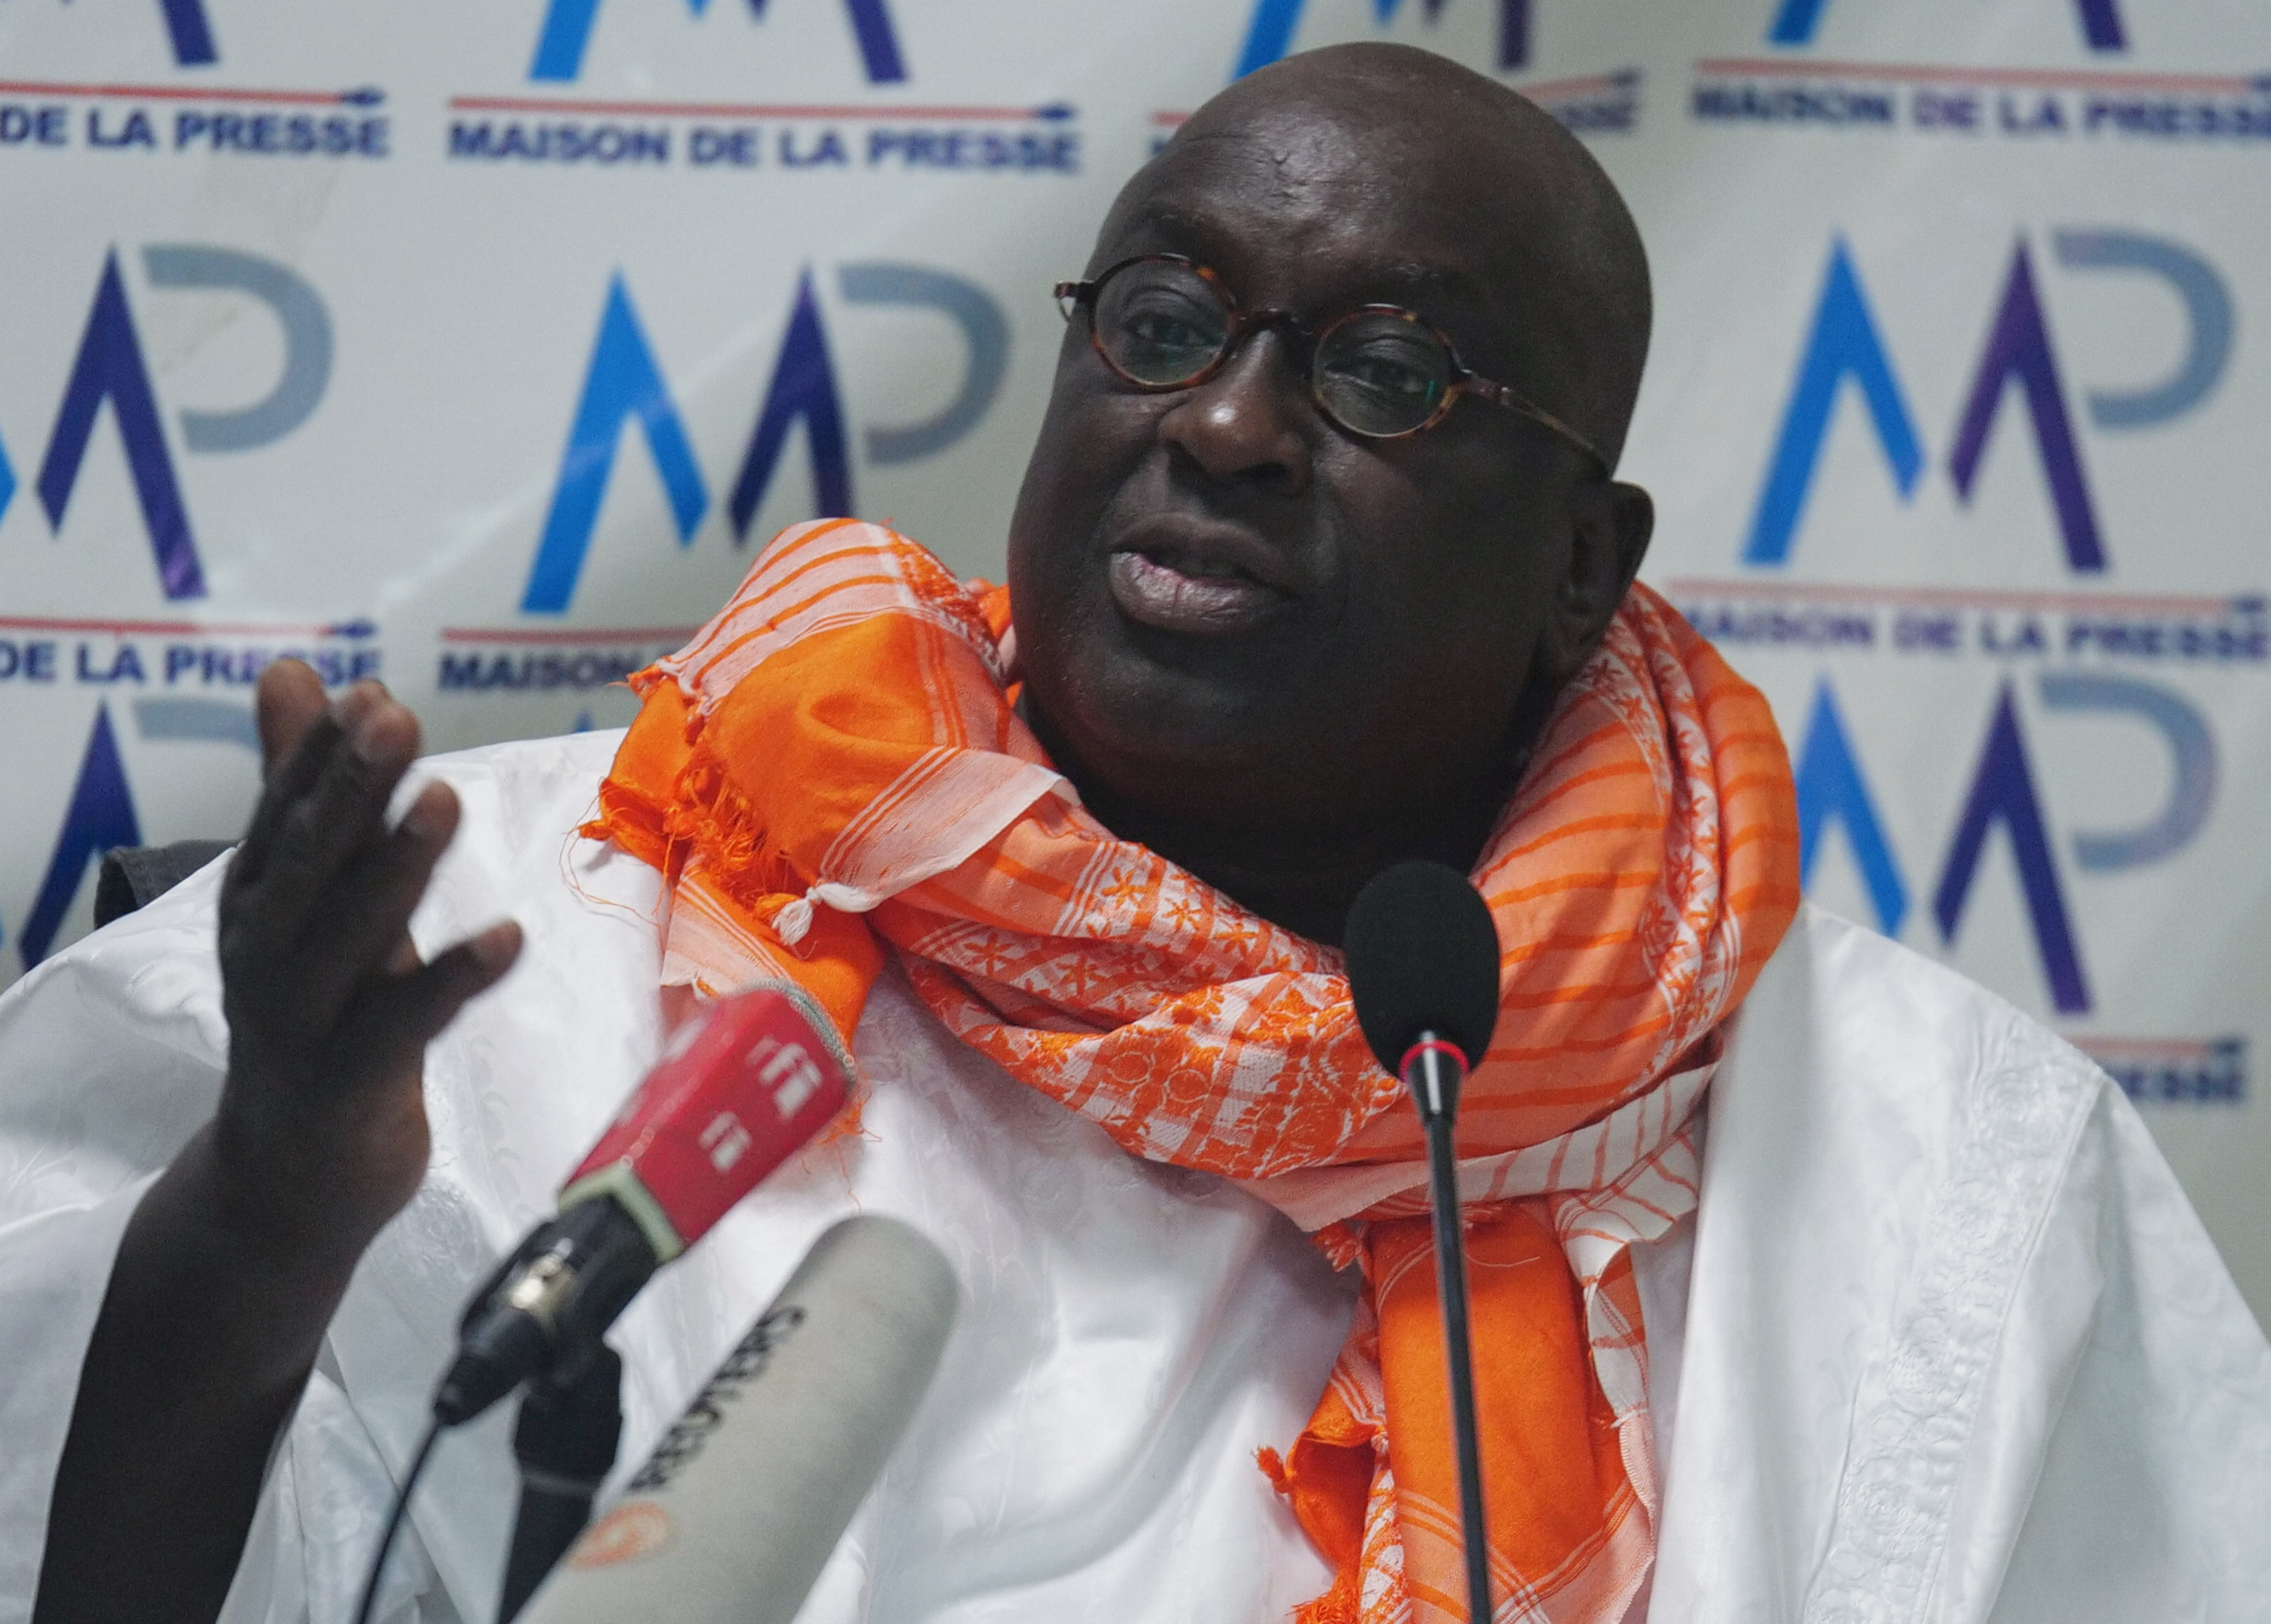 Papa Massata Diack, the son of former world athletics chief Lamine Diack, speaks out ahead of a September 16 verdict in his father's corruption trial in Dakar